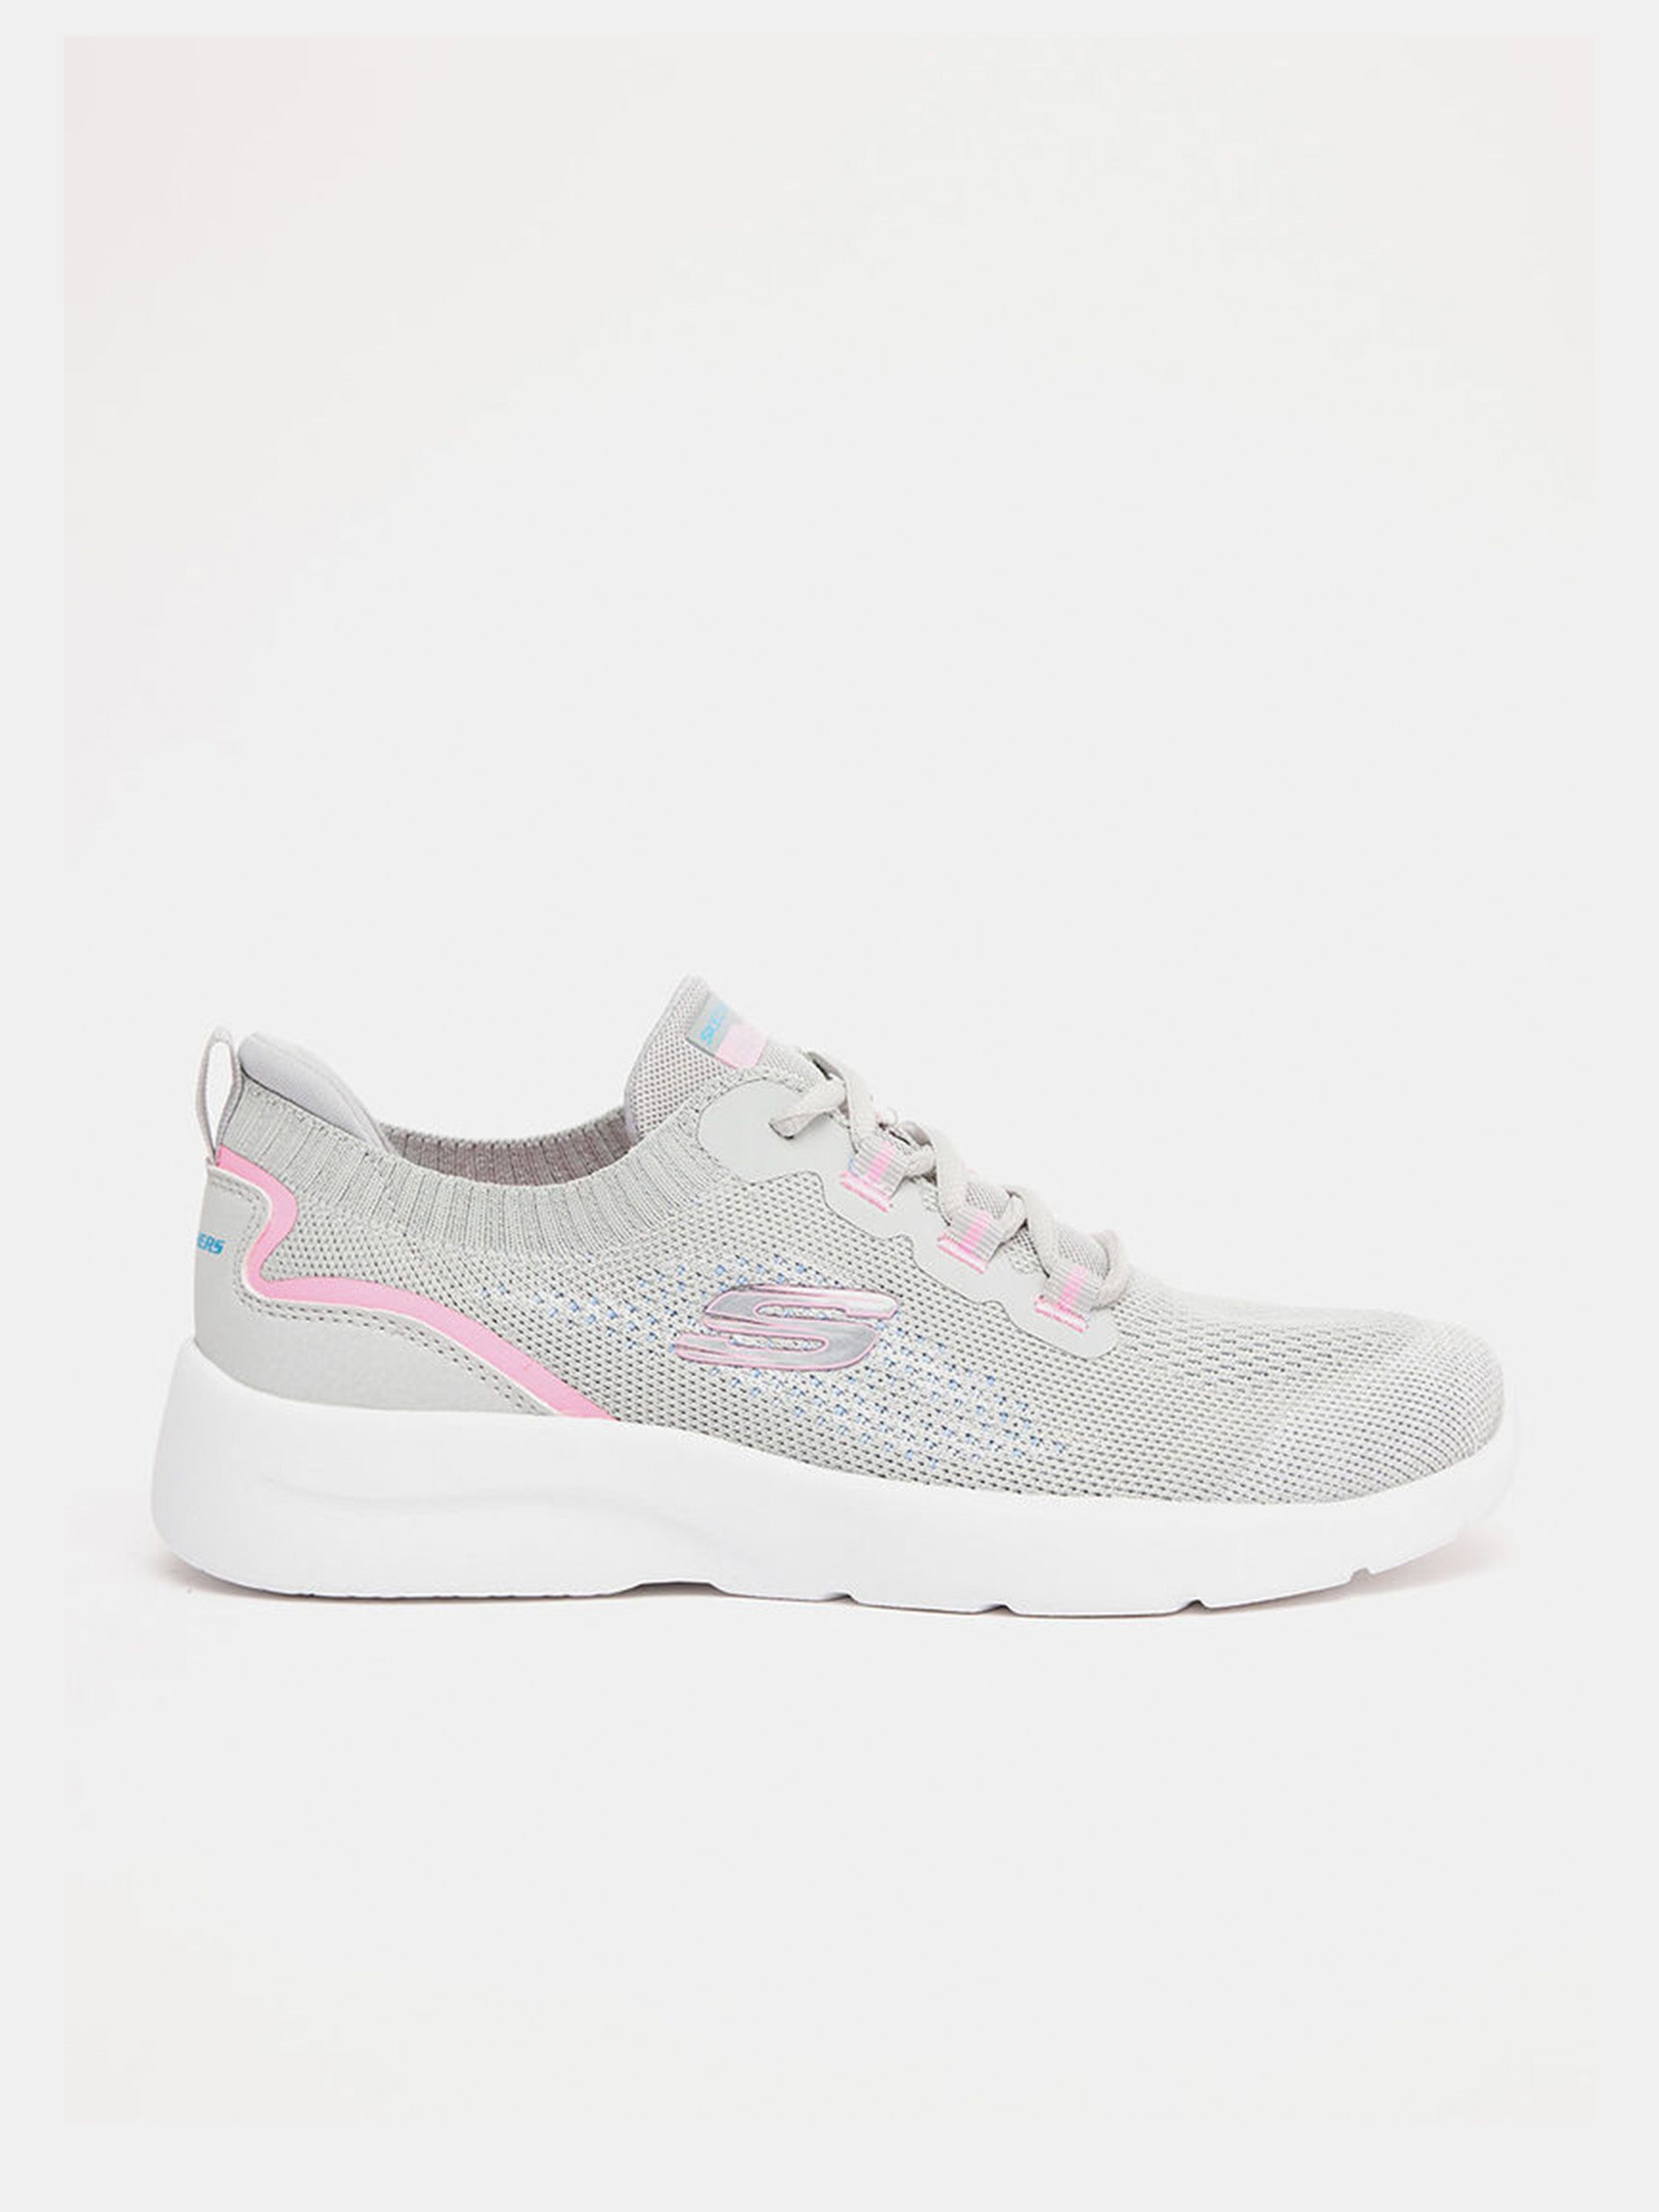 Skechers Women's Dynamight 2.0 Trainers #color_Grey